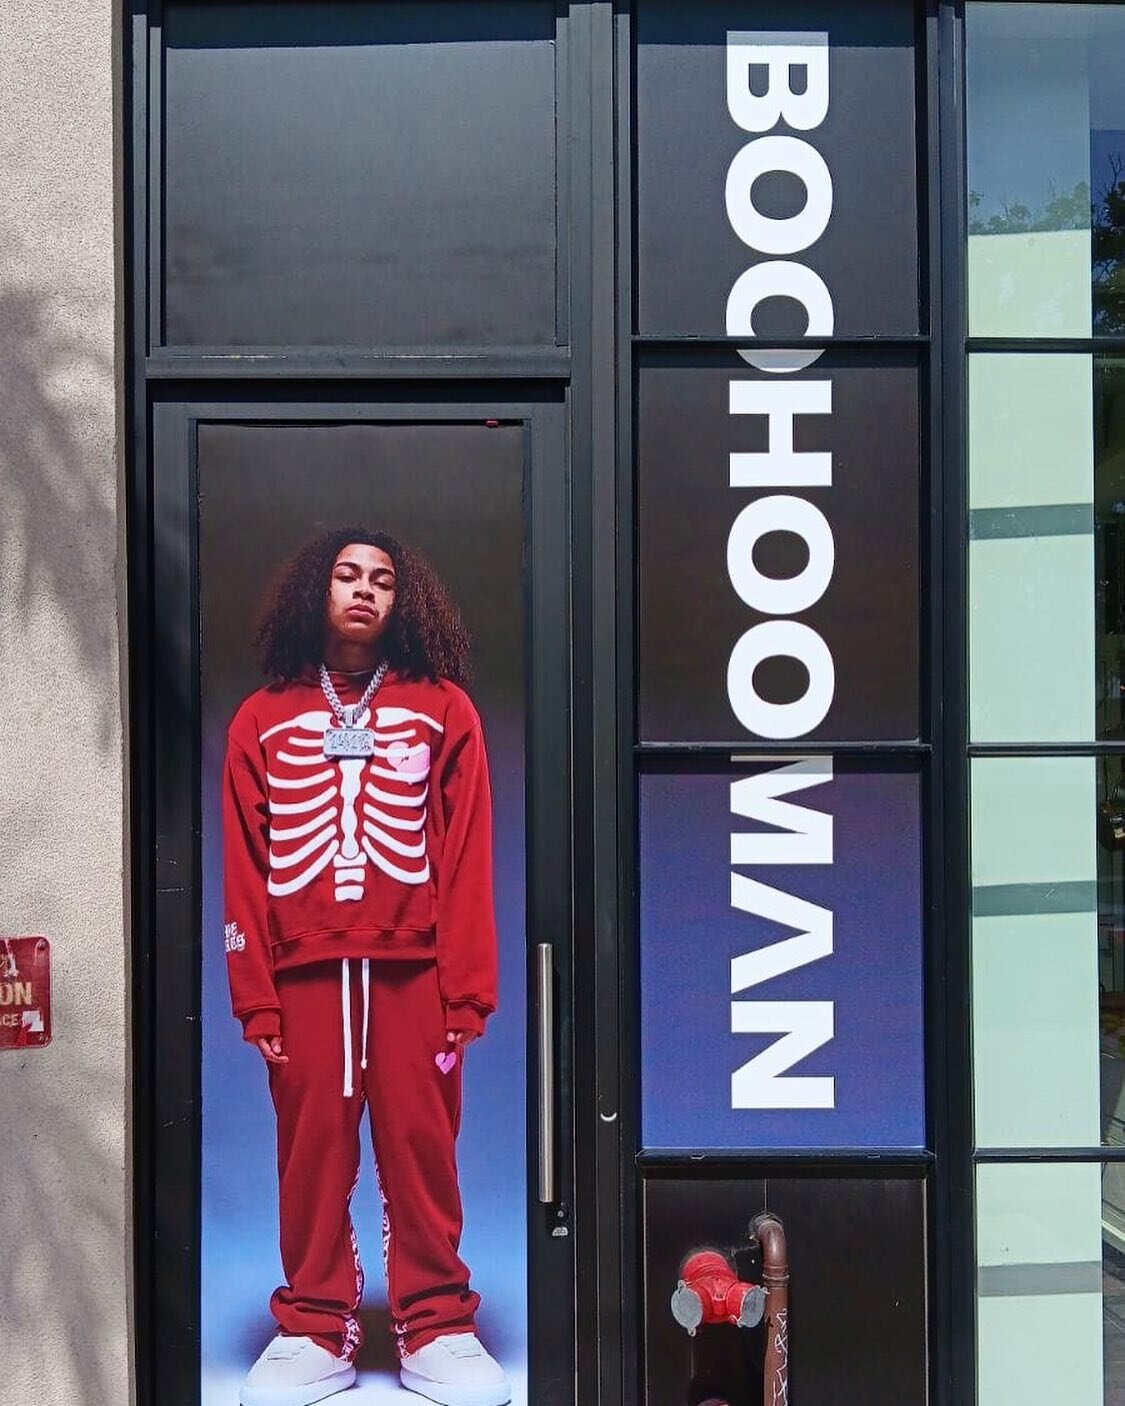 A spring refresh for @boohoomanofficial on #MelrosePlace! 

#thewotp #wifeoftheparty #boohoo #boohooman #melrose #vinyl #branding